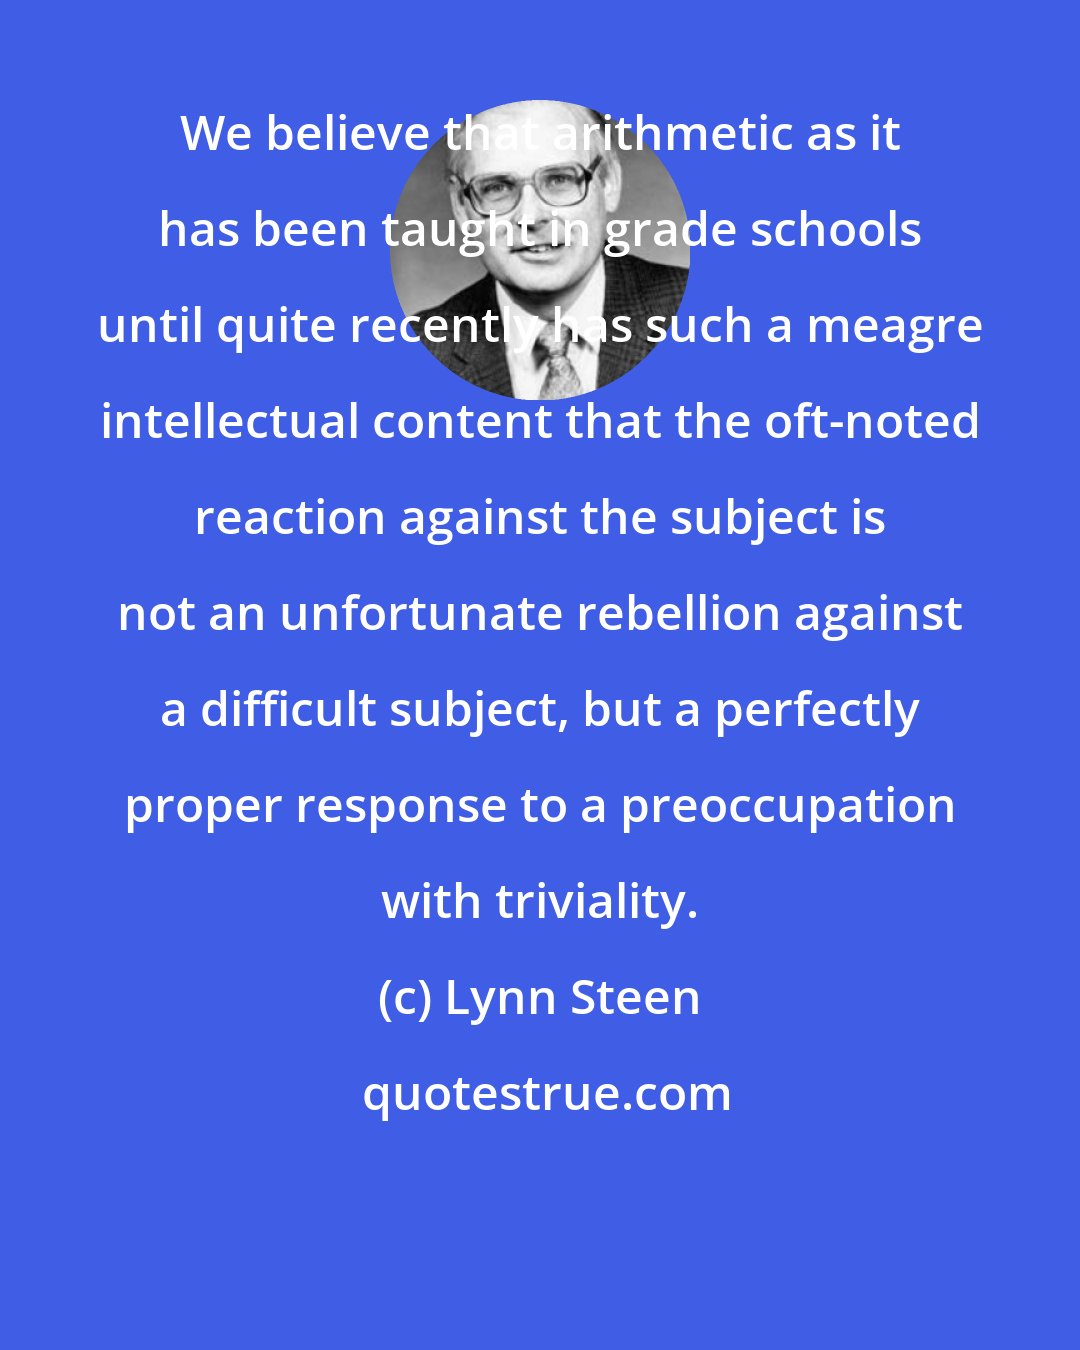 Lynn Steen: We believe that arithmetic as it has been taught in grade schools until quite recently has such a meagre intellectual content that the oft-noted reaction against the subject is not an unfortunate rebellion against a difficult subject, but a perfectly proper response to a preoccupation with triviality.